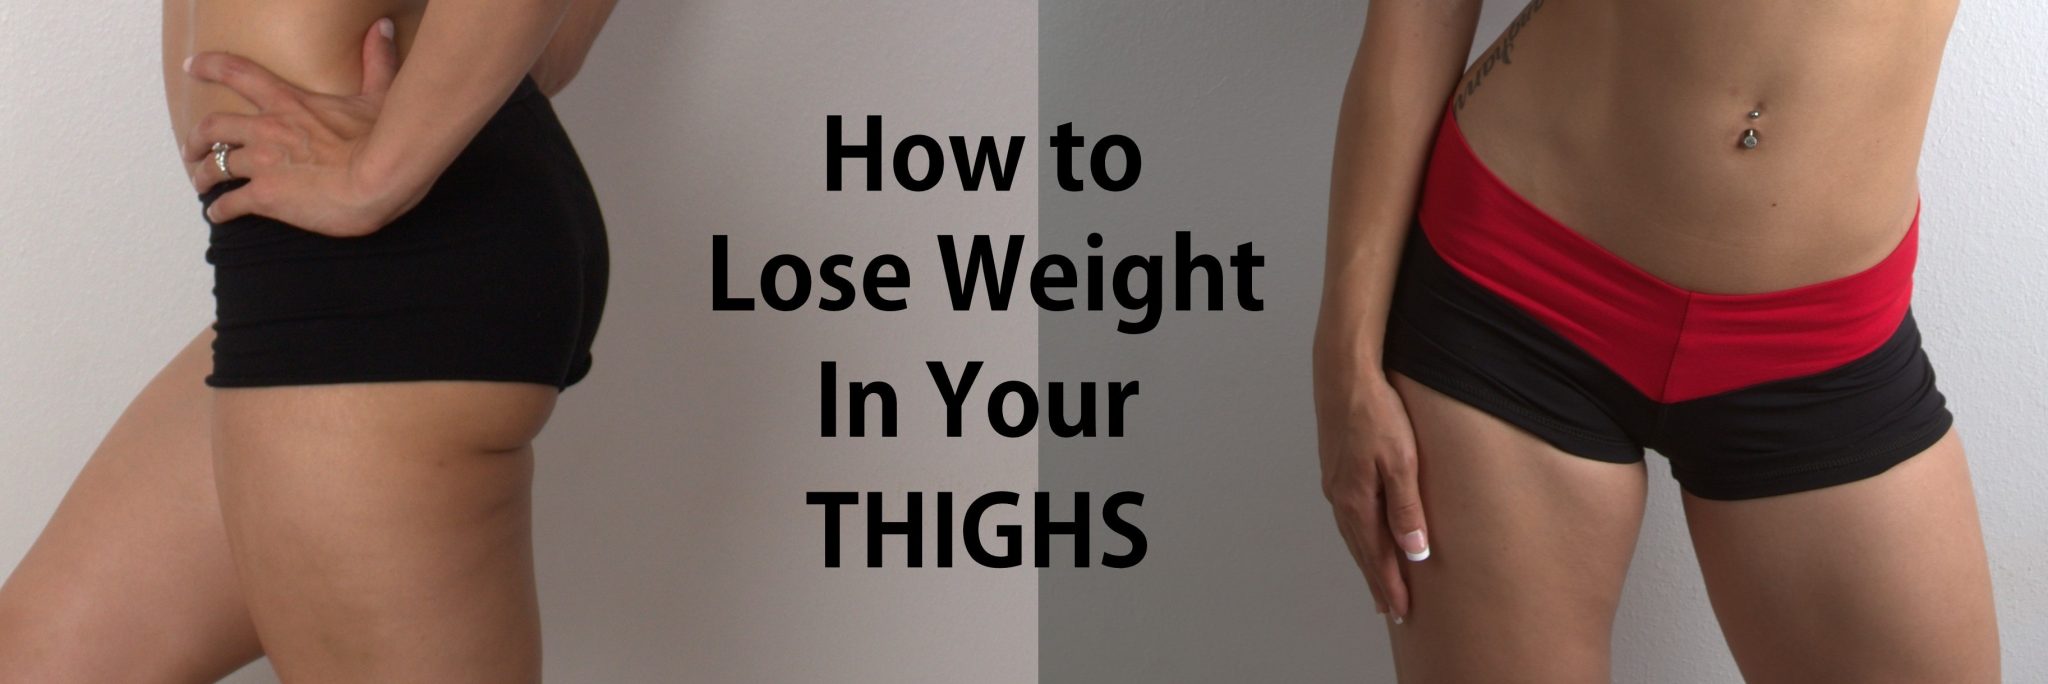 How To Lose Weight in the Thighs